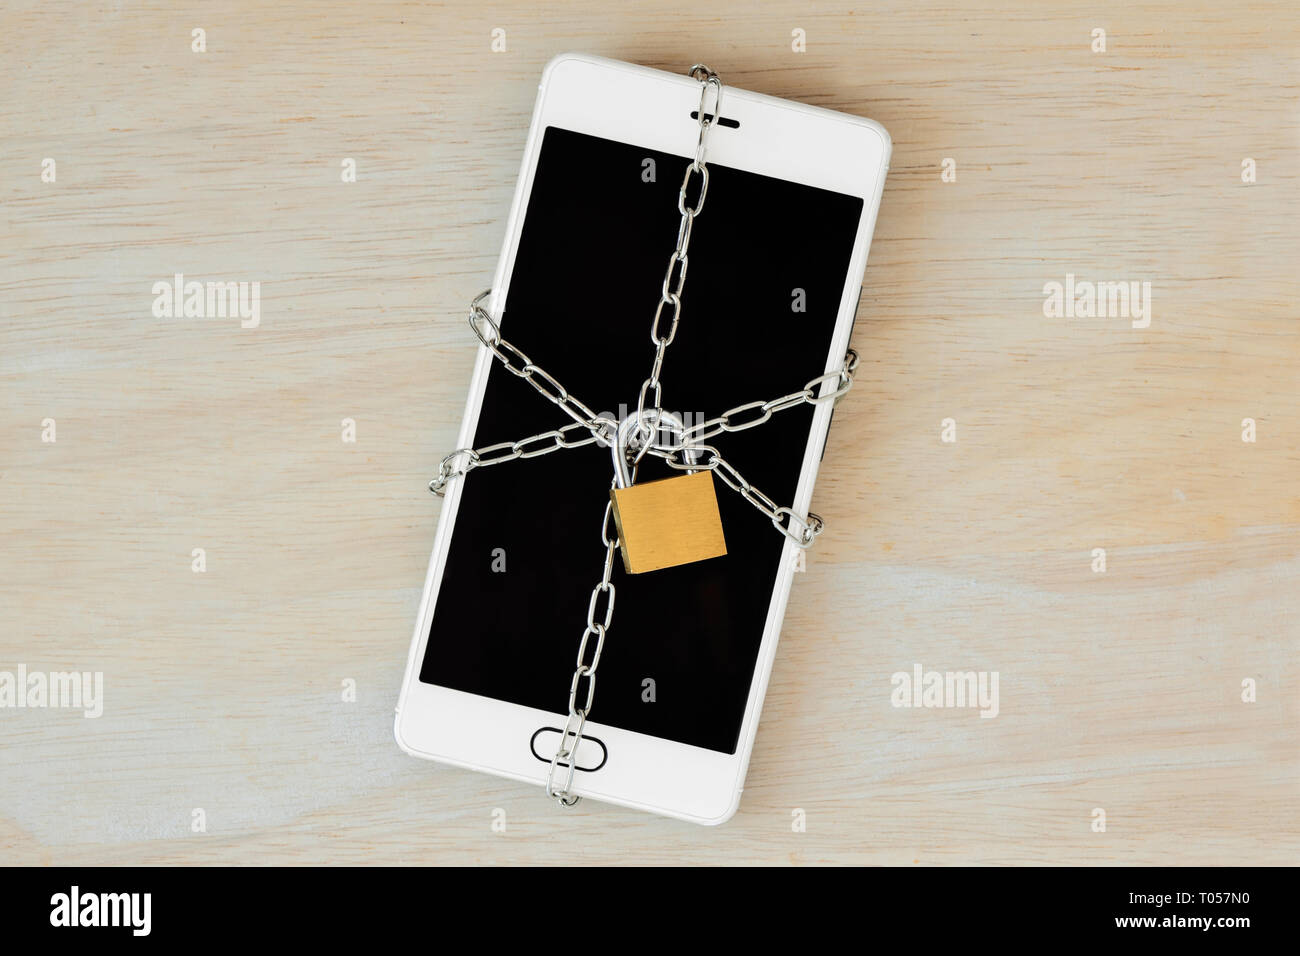 Smartphone locked with chain and padlock - Concept of mobile security and data privacy Stock Photo